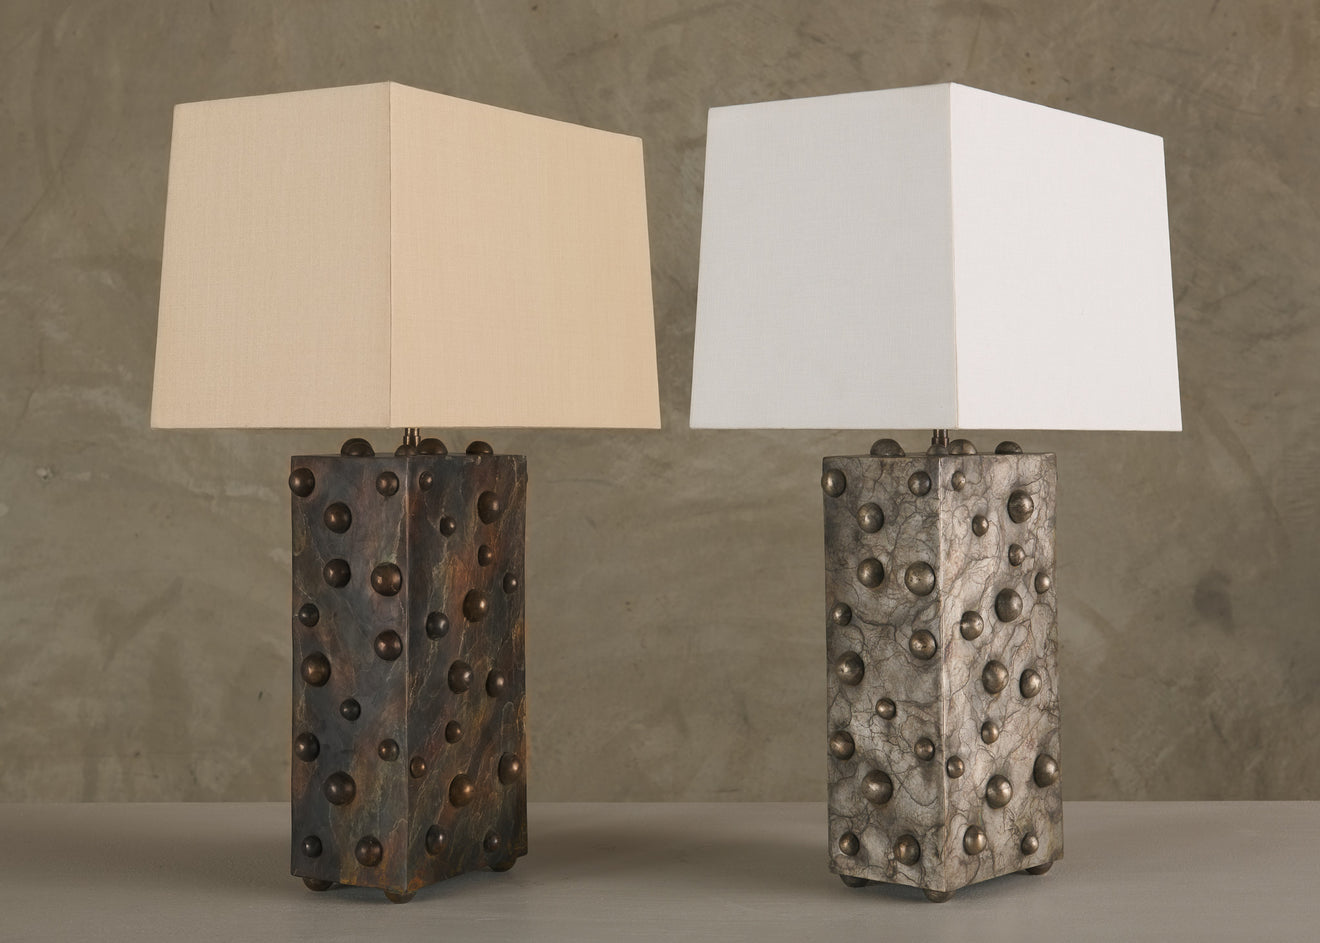 BC WORKSHOP SILVERED VERTICAL STUDDED LAMP BY LIKA MOORE